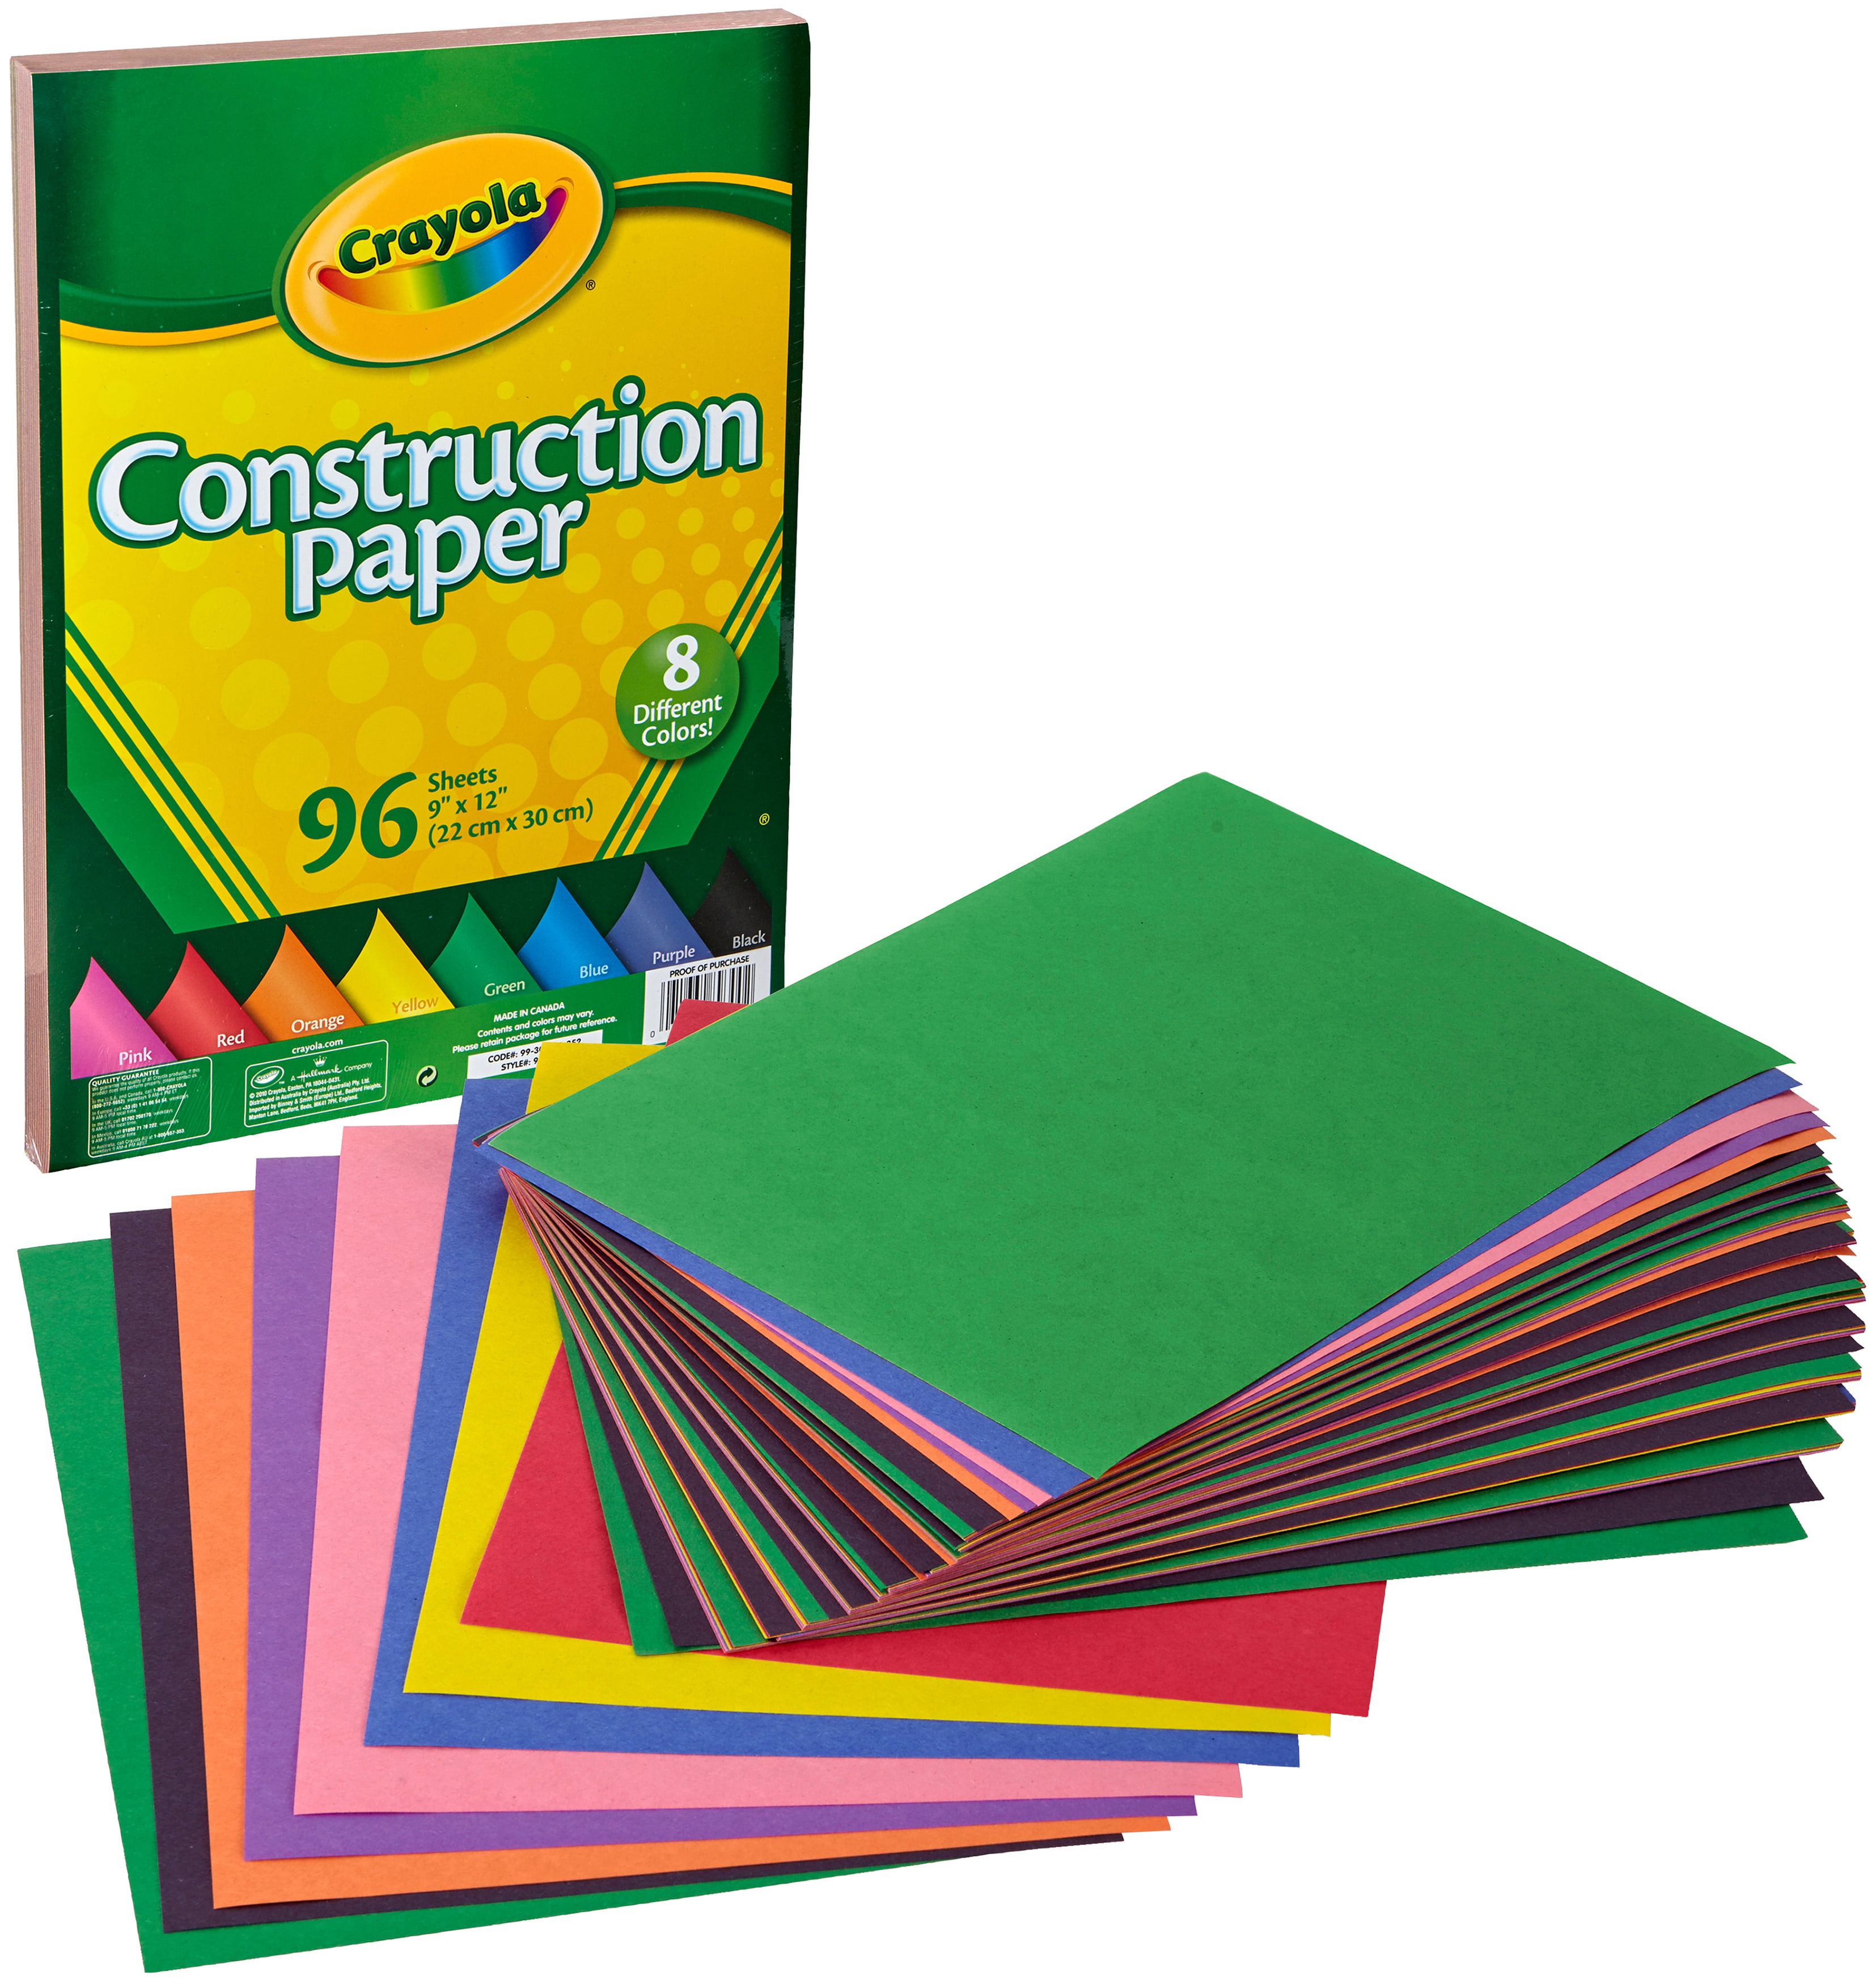 Crayola Construction Paper 8 different colors 120 Sheets 